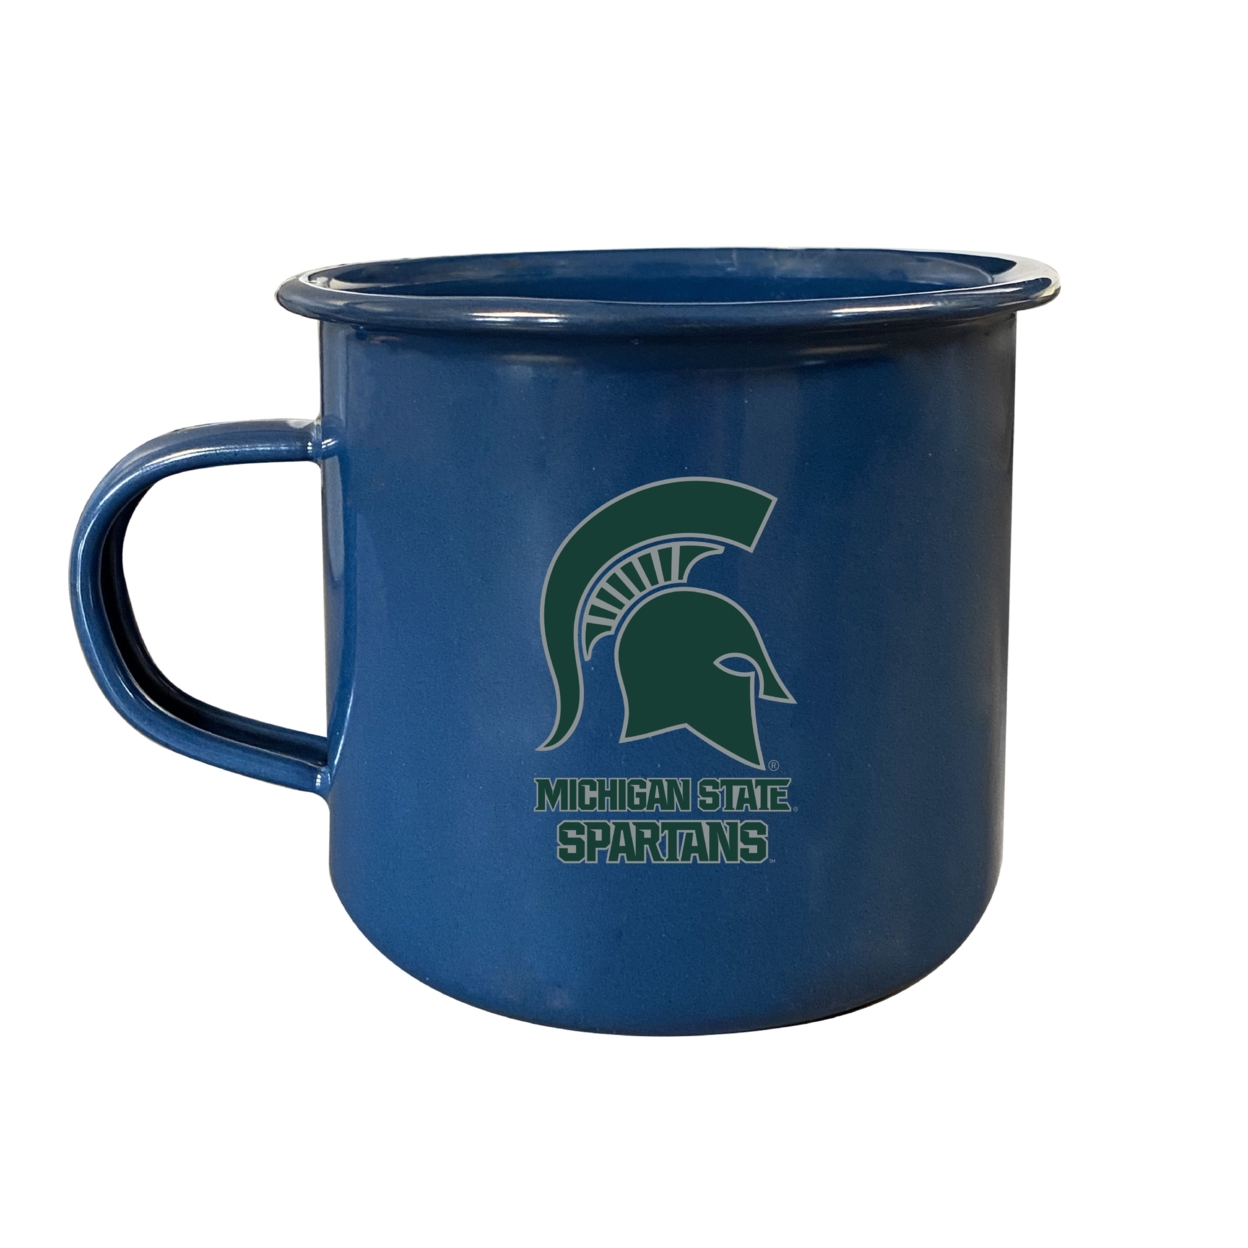 Michigan State Spartans Tin Camper Coffee Mug - Choose Your Color - Navy